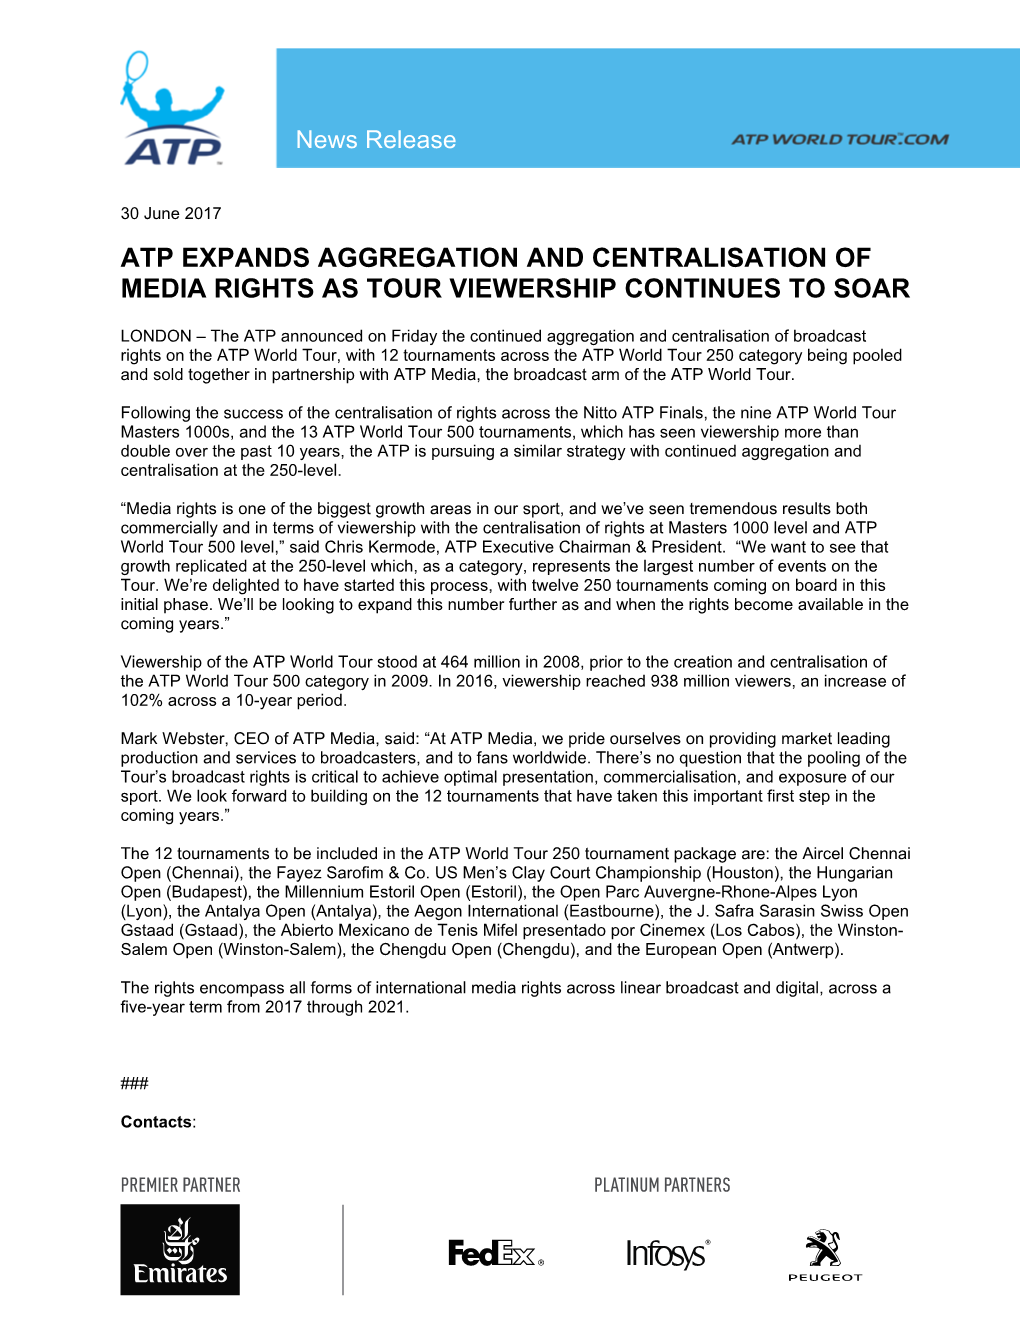 Atp Expands Aggregation and Centralisation of Media Rights As Tour Viewership Continues to Soar